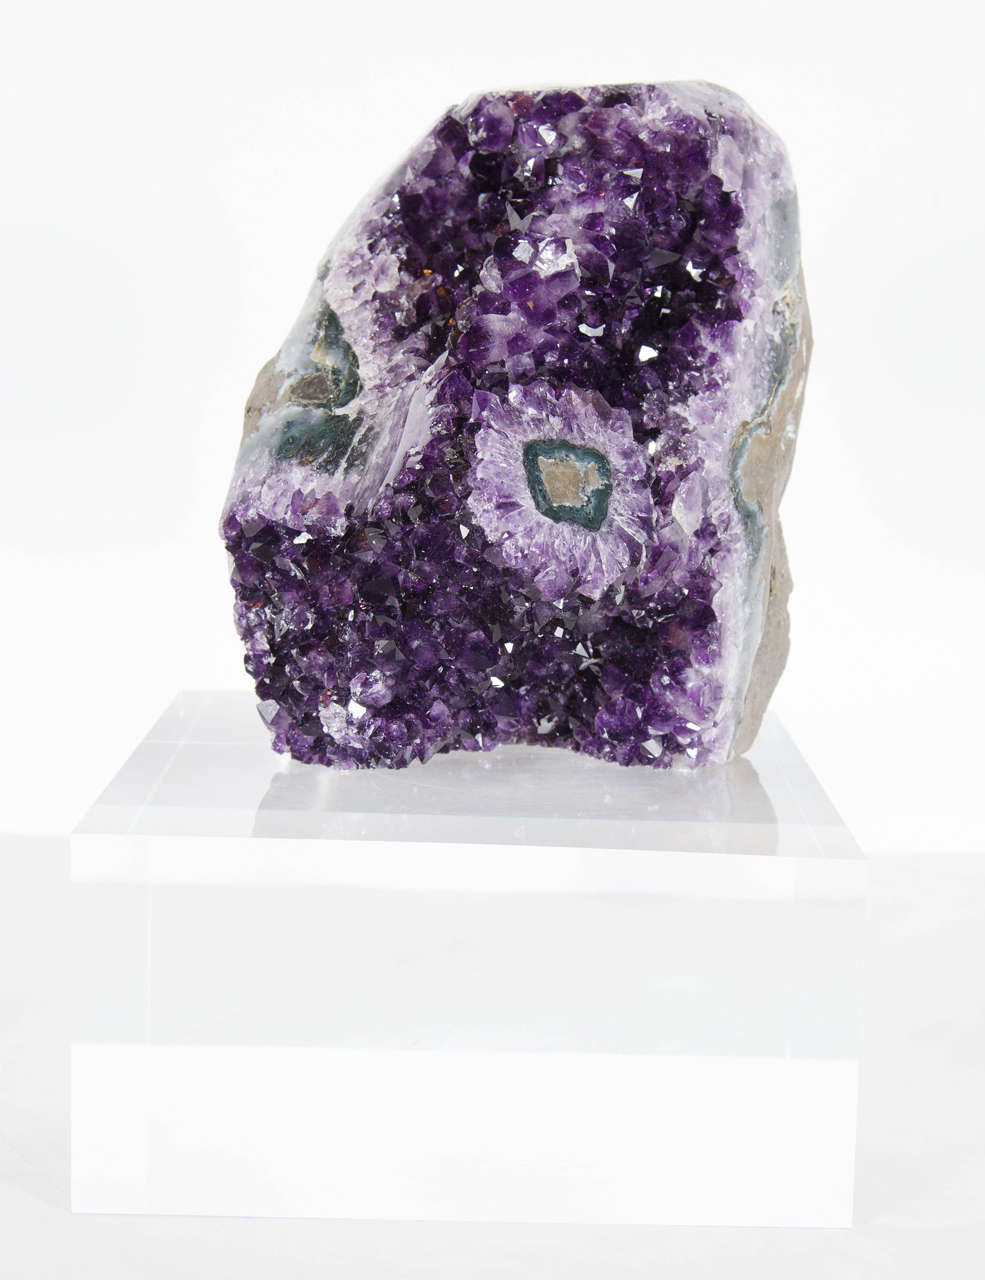 This exceptional amethyst rock specimen features an intricate design of crystalline structures with a myriad of purple, lilac, and lavender hues. It's oblong three dimensional shape showcases it's complex structure and it's free standing thick